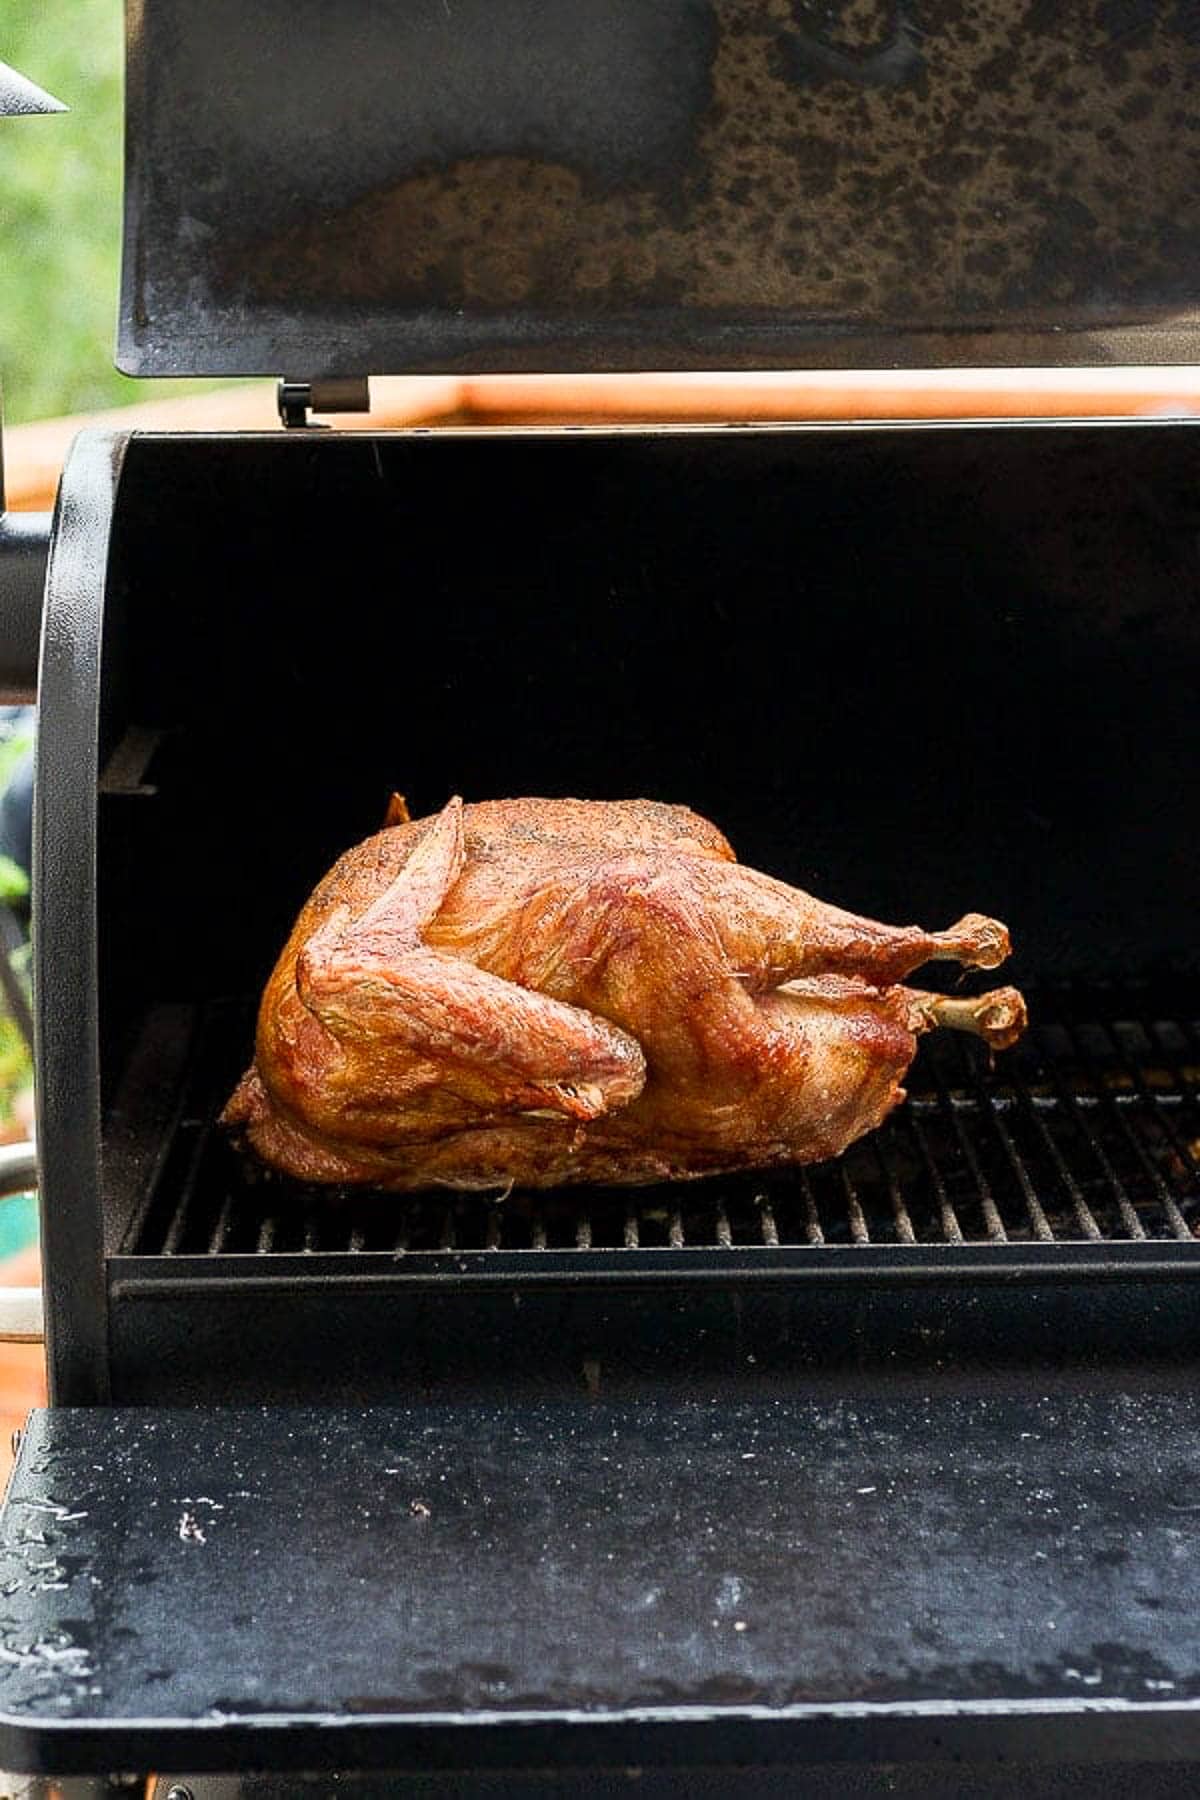 A smoked turkey on a Traeger grill.